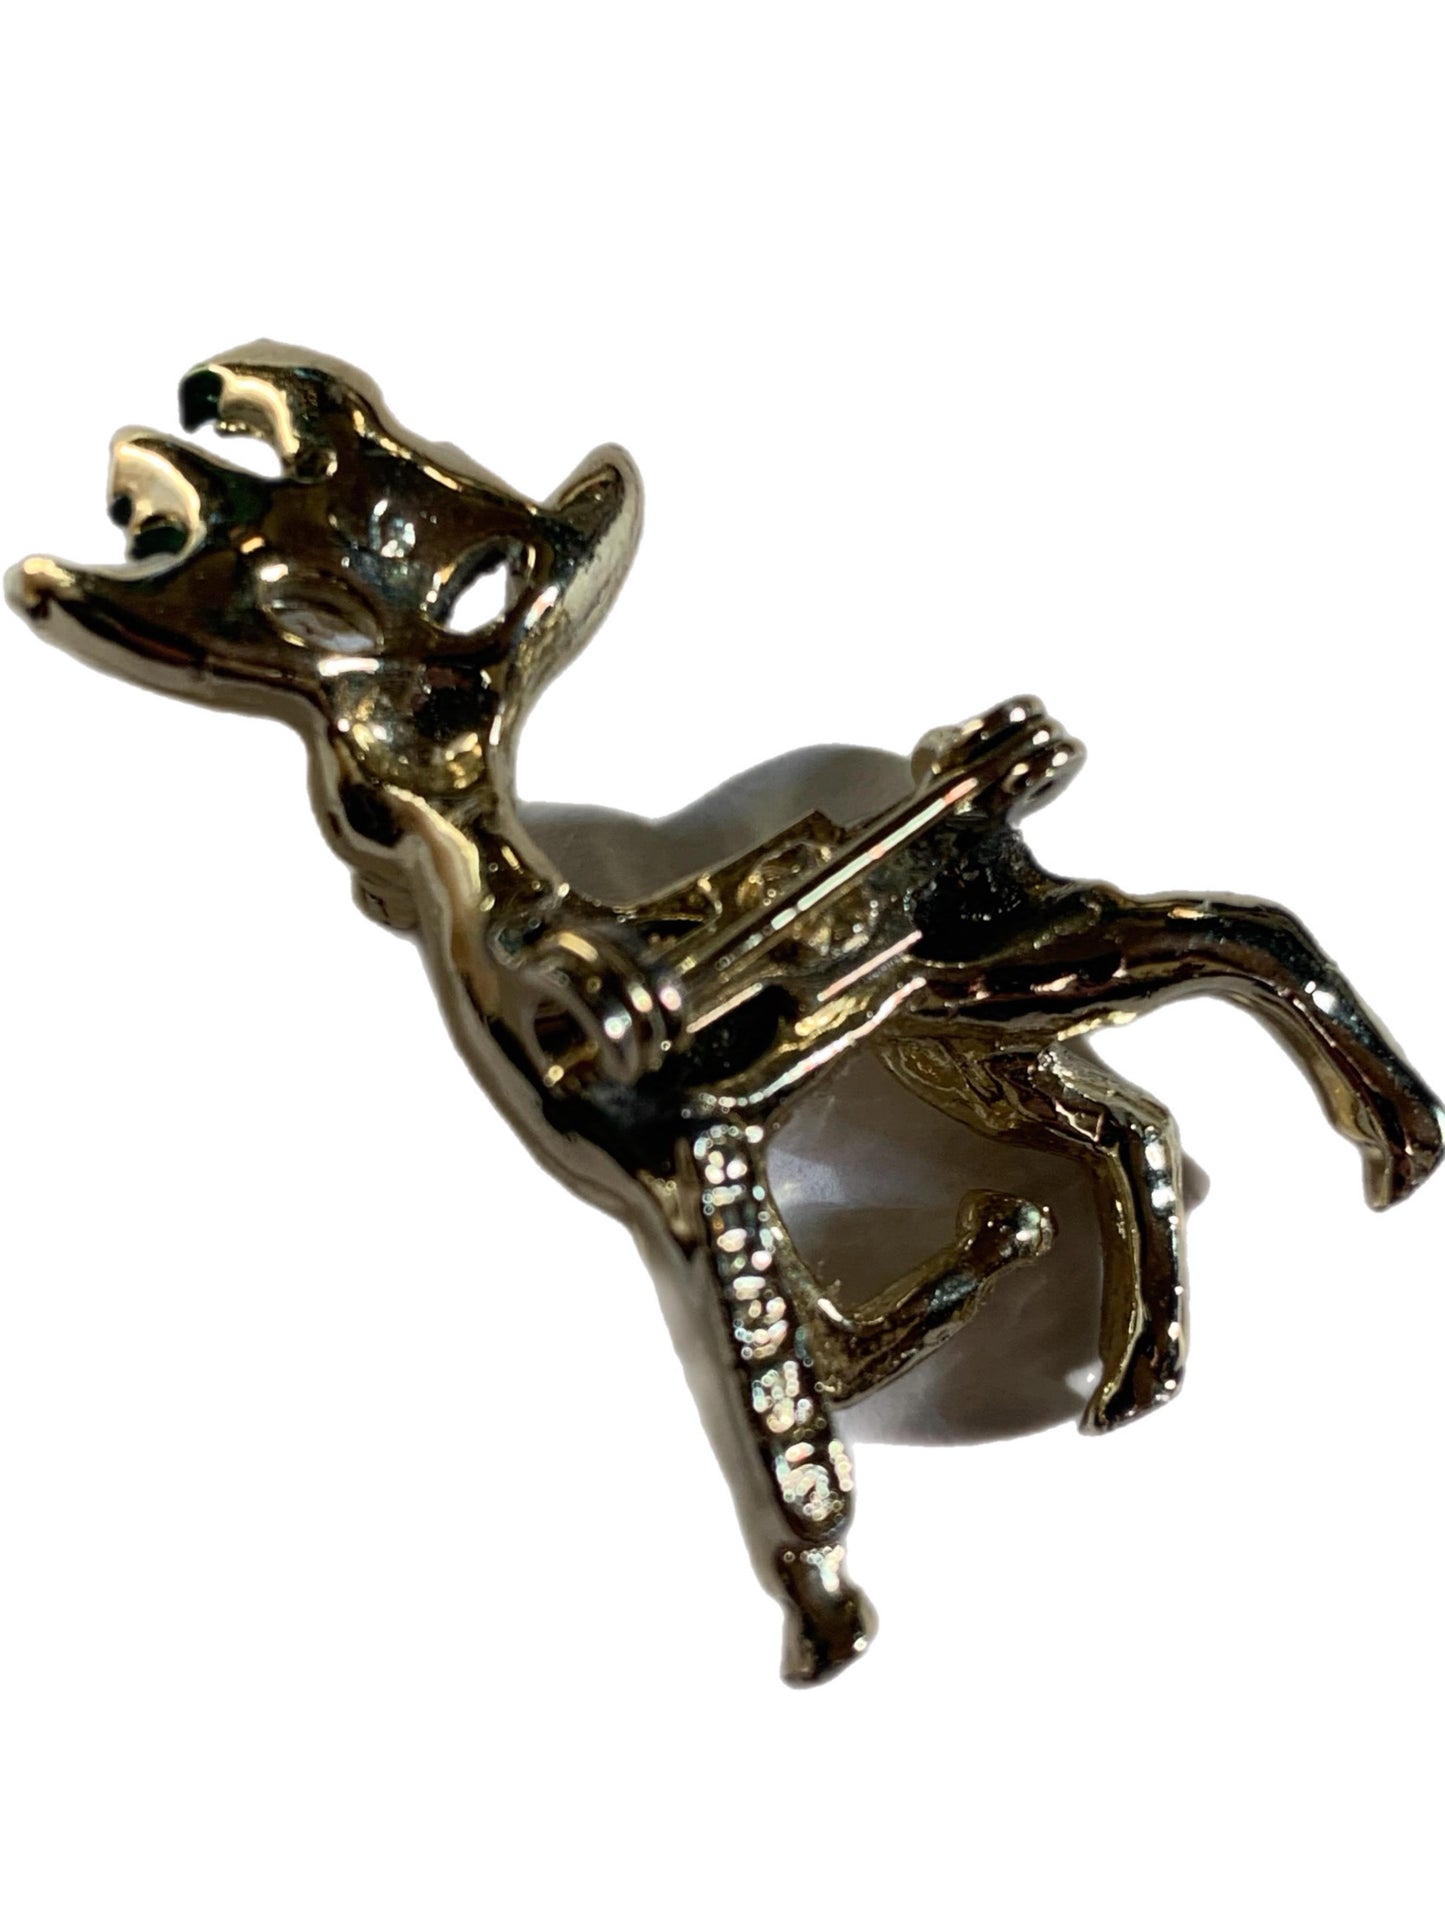 Holly Topped Reindeer Small Brooch circa 1960s